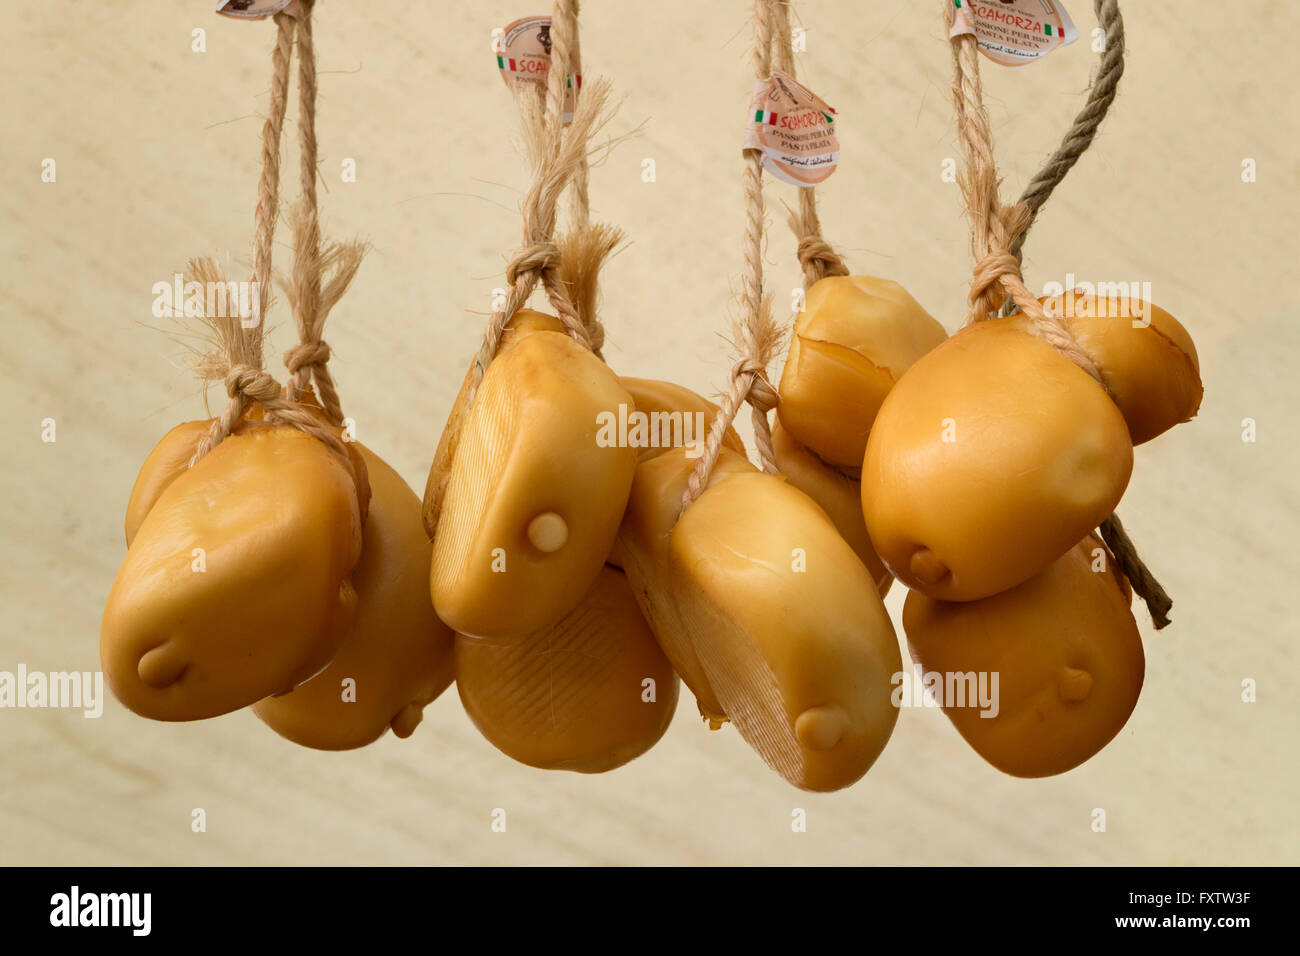 Smoked scamorza cheeses hanging on ropes Stock Photo